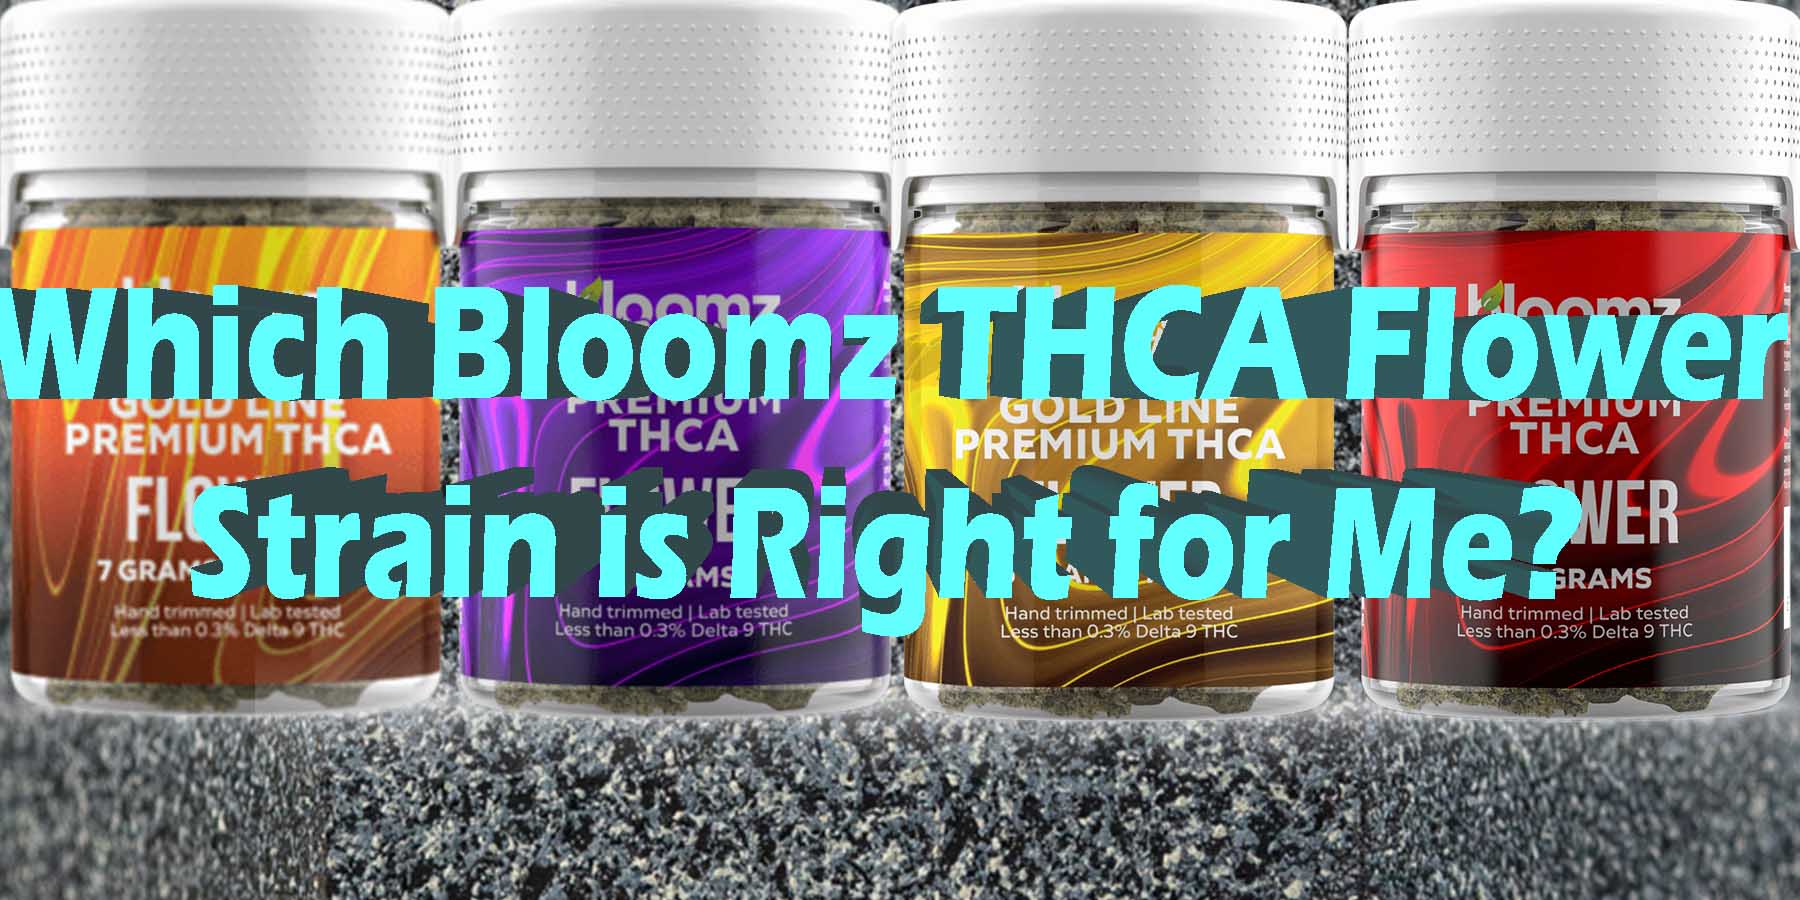 Which Bloomz THCA Flower Strain is Right for Me WhereToGet HowToGetNearMe BestPlace LowestPrice Coupon Discount For Smoking Best High Smoke Shop Online Near Me StrongestBrand Binoid